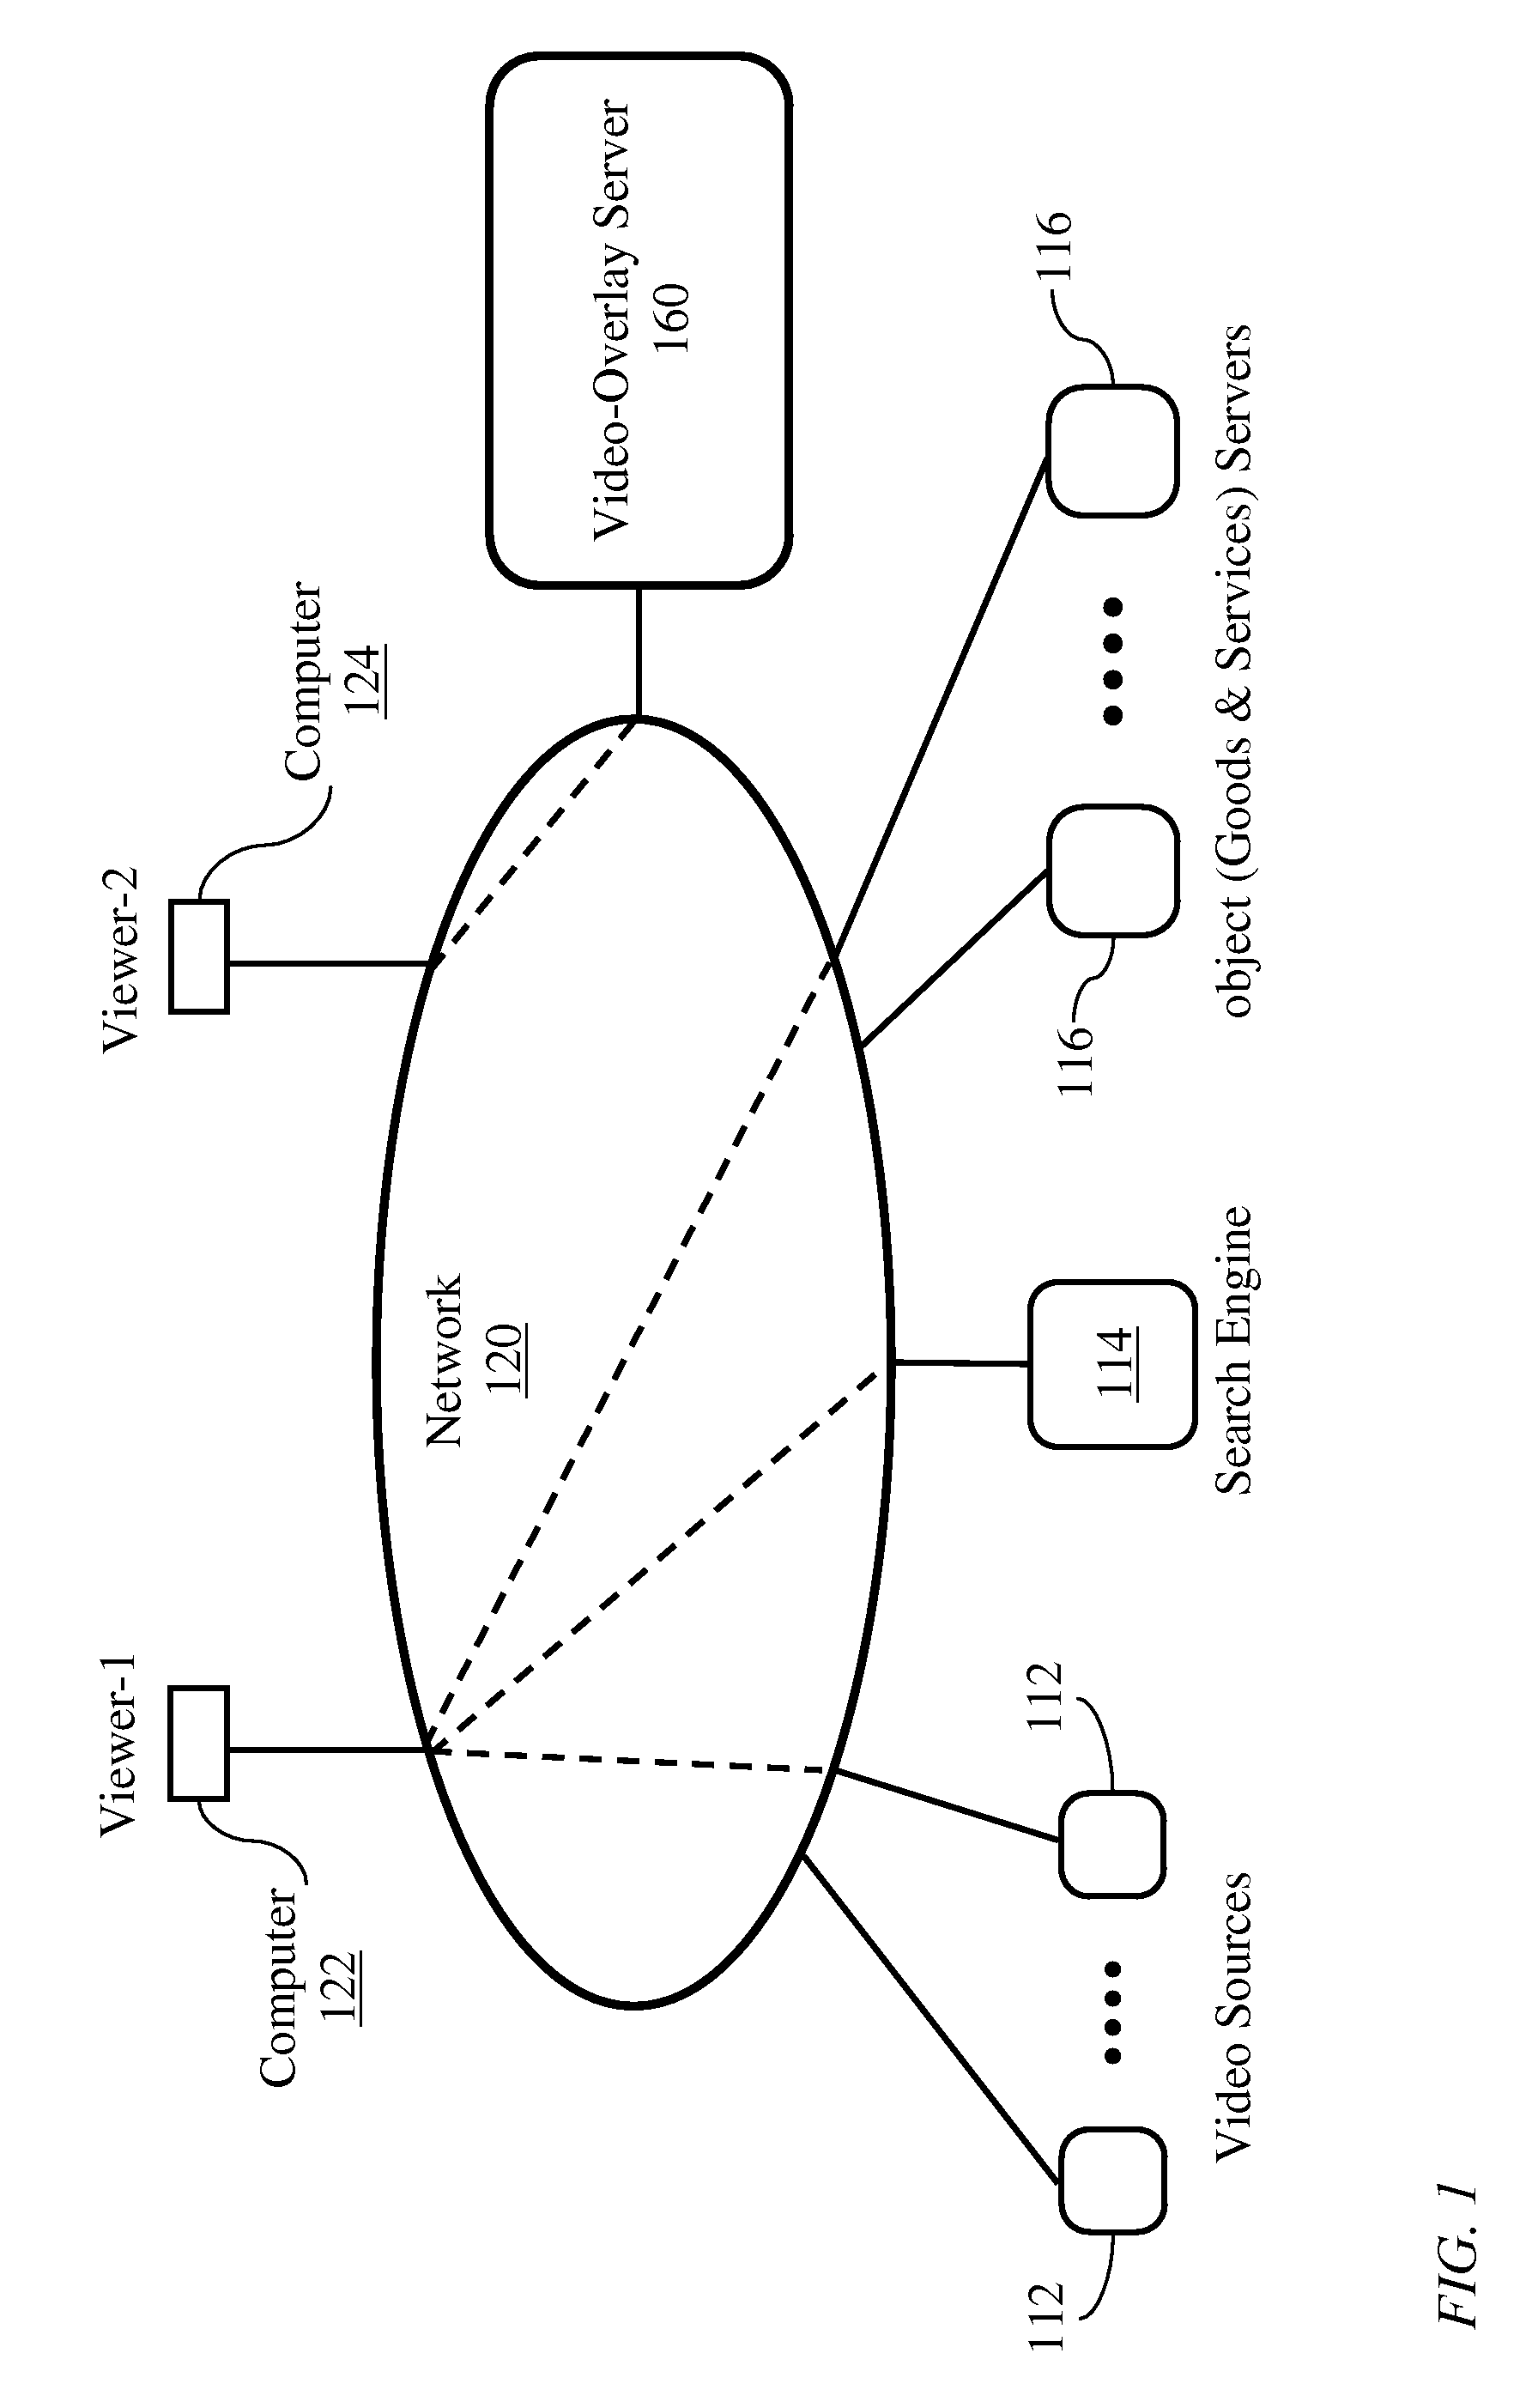 Distributed system for linking content of video signals to information sources